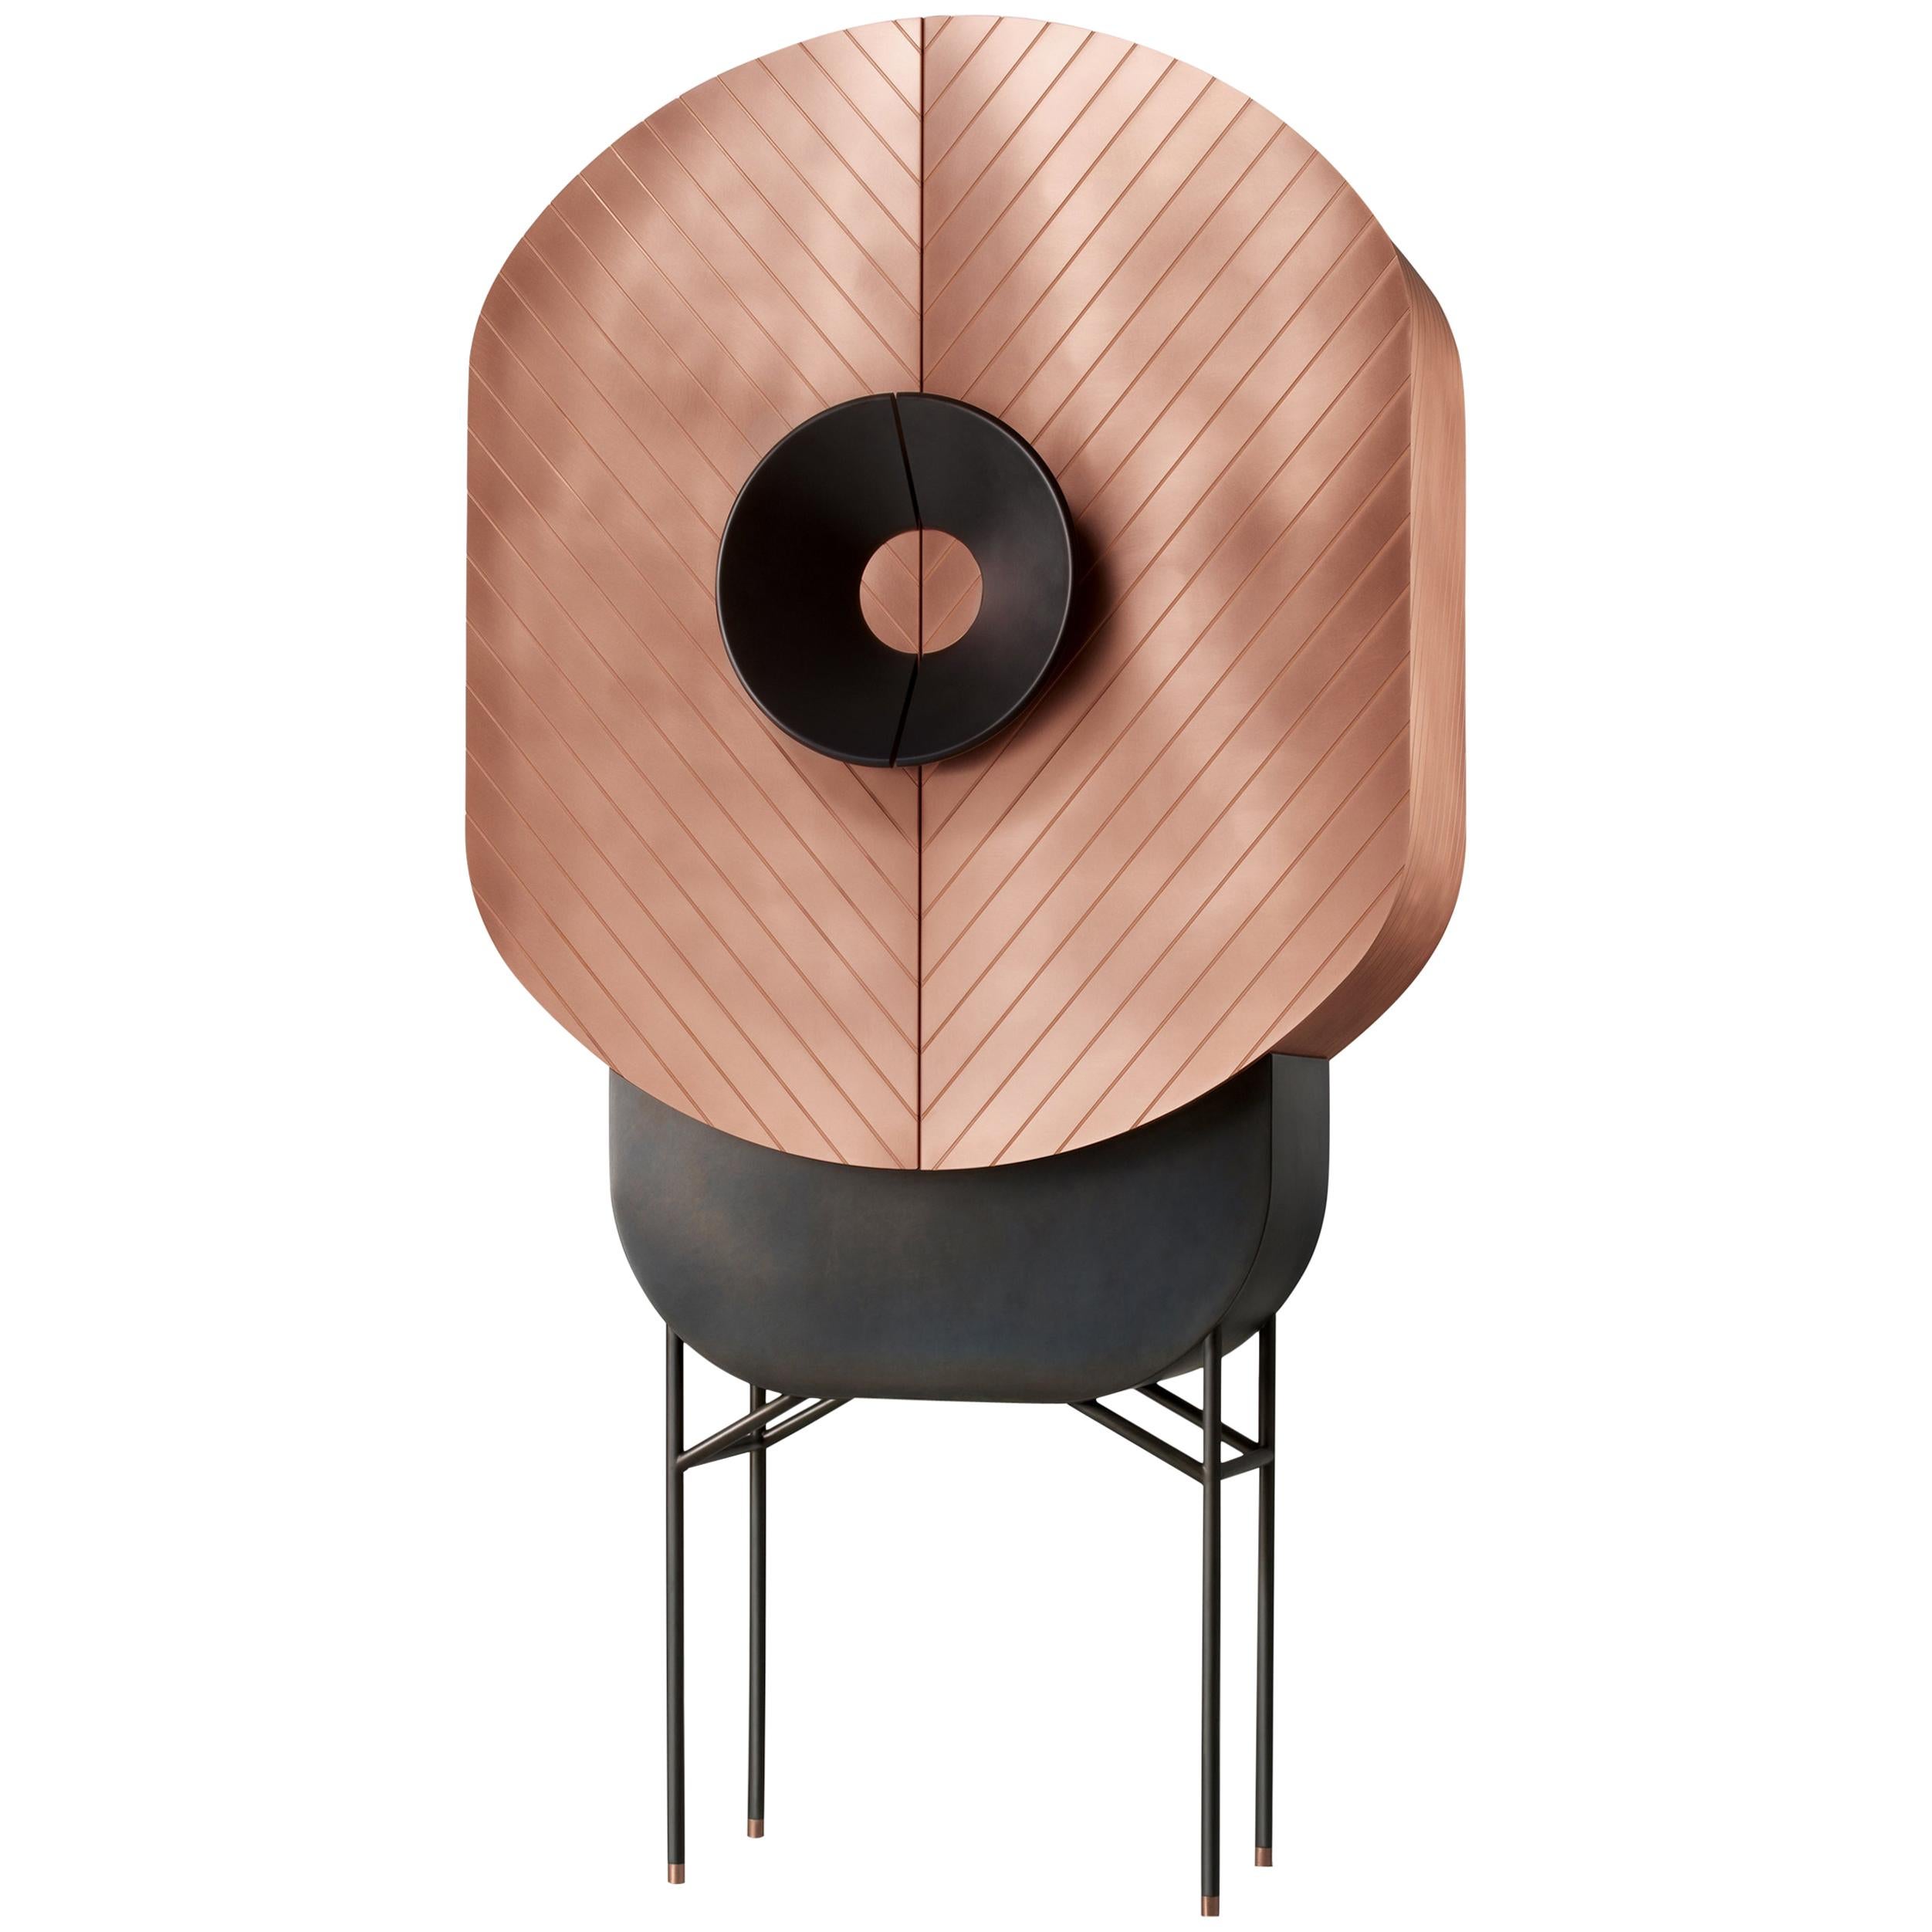 DeCastelli Polifemo Cabinet in Brushed Copper by Elena Salmistraro